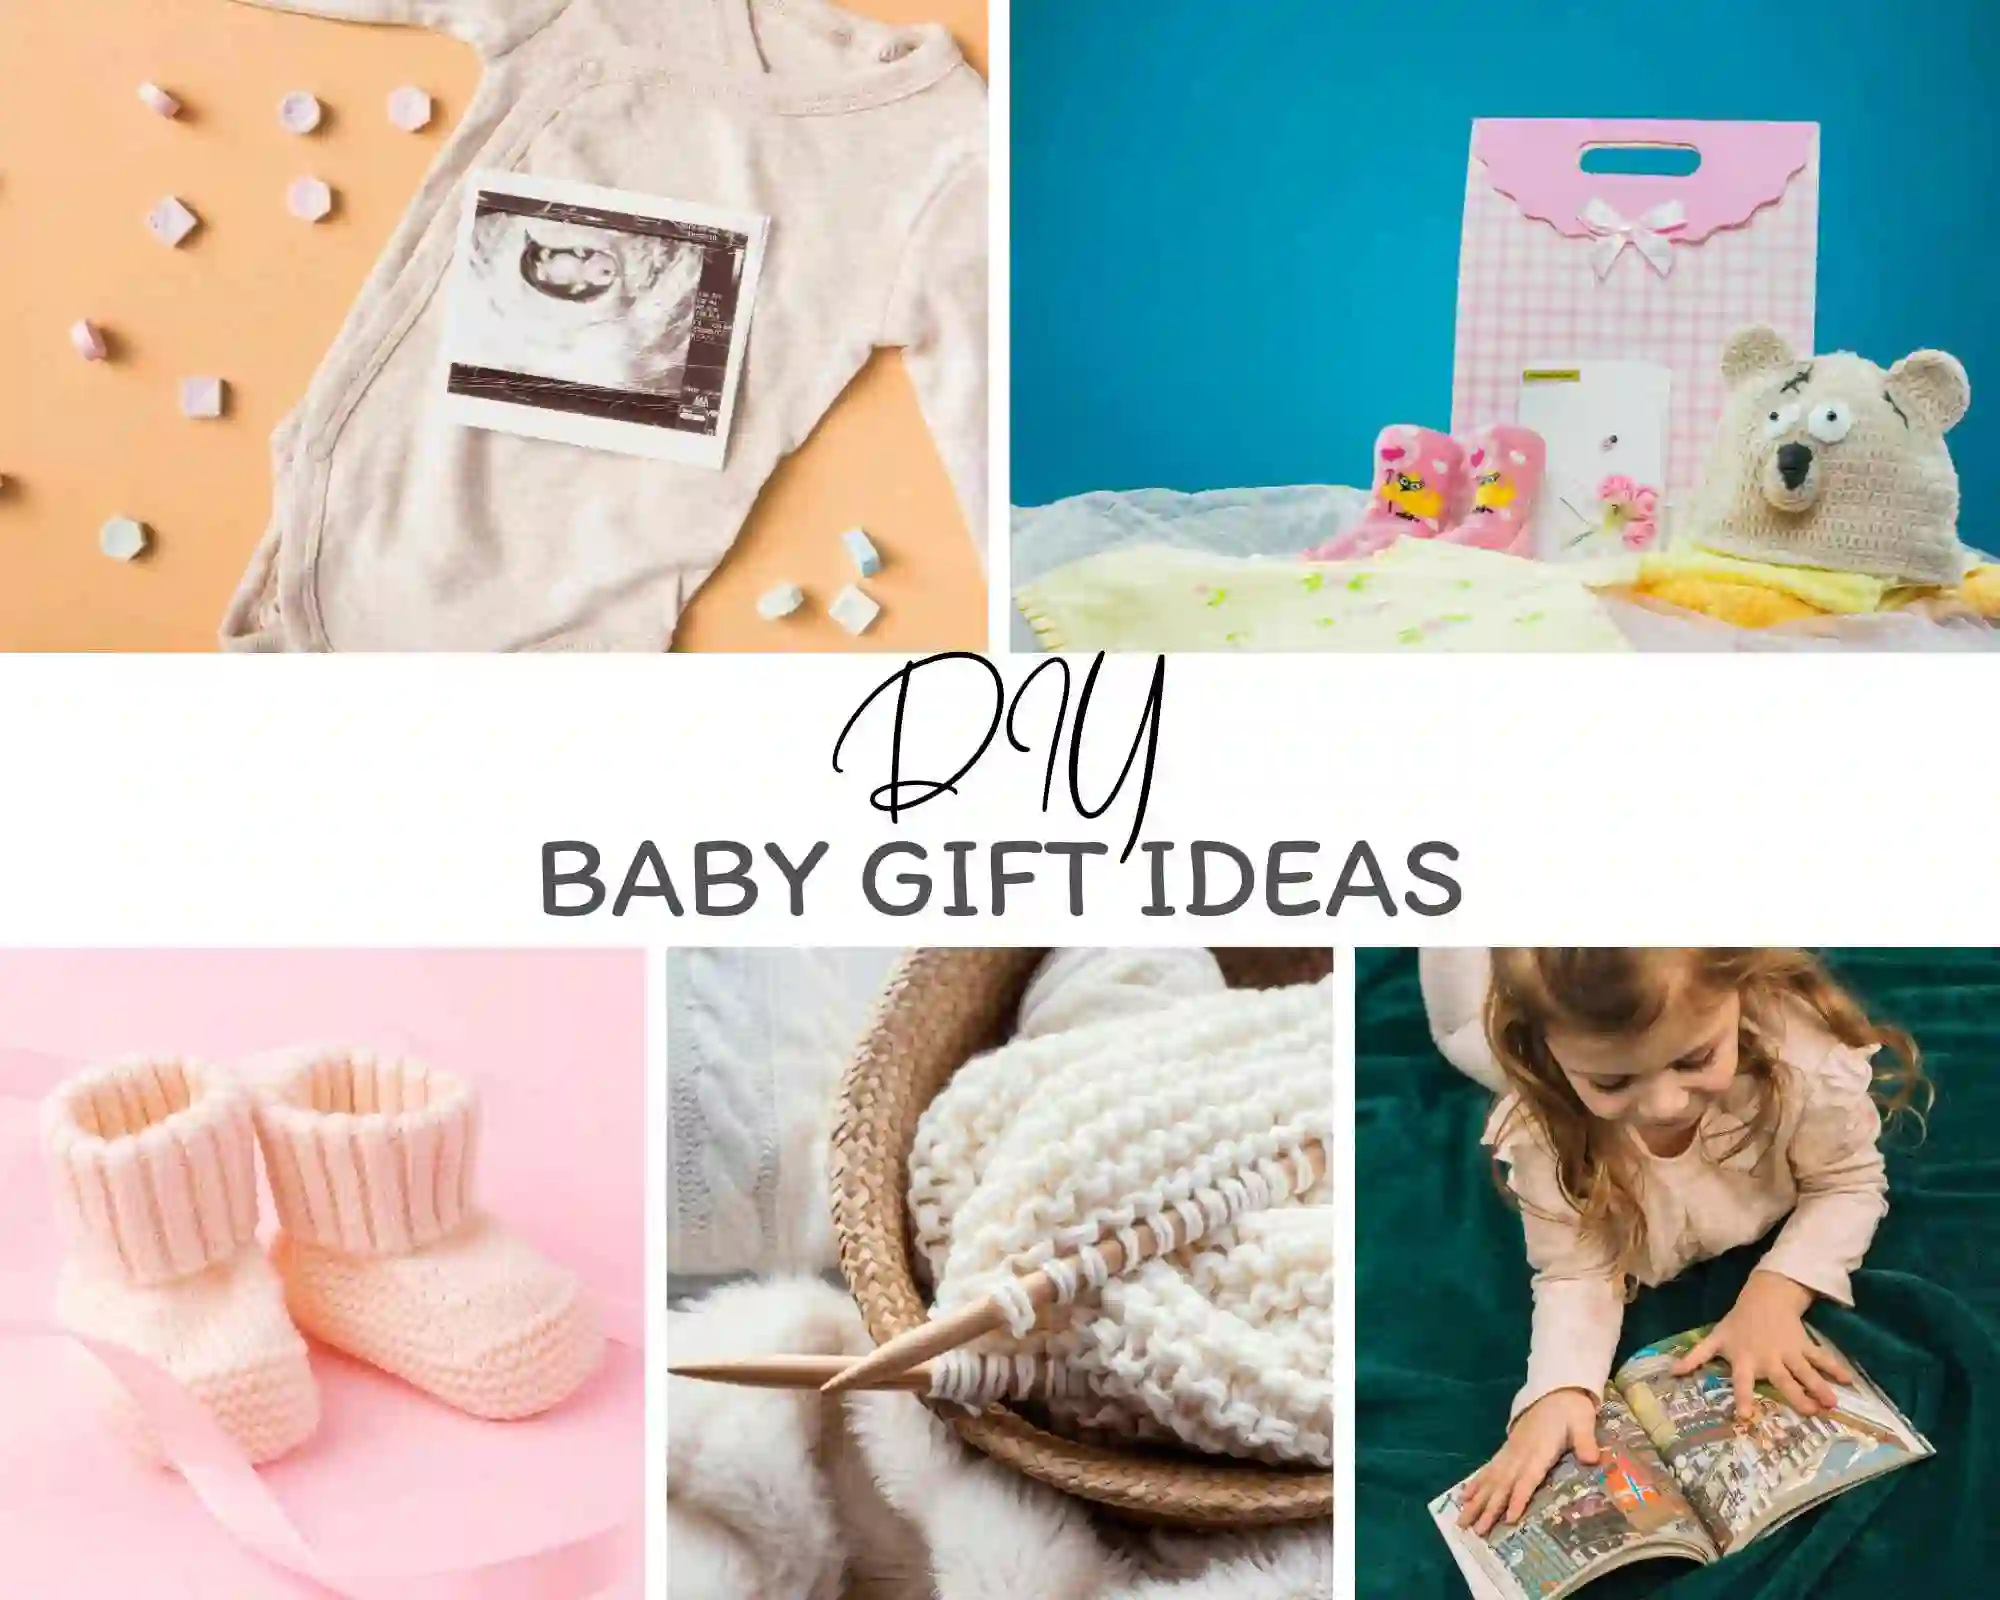 Homemade baby gifts